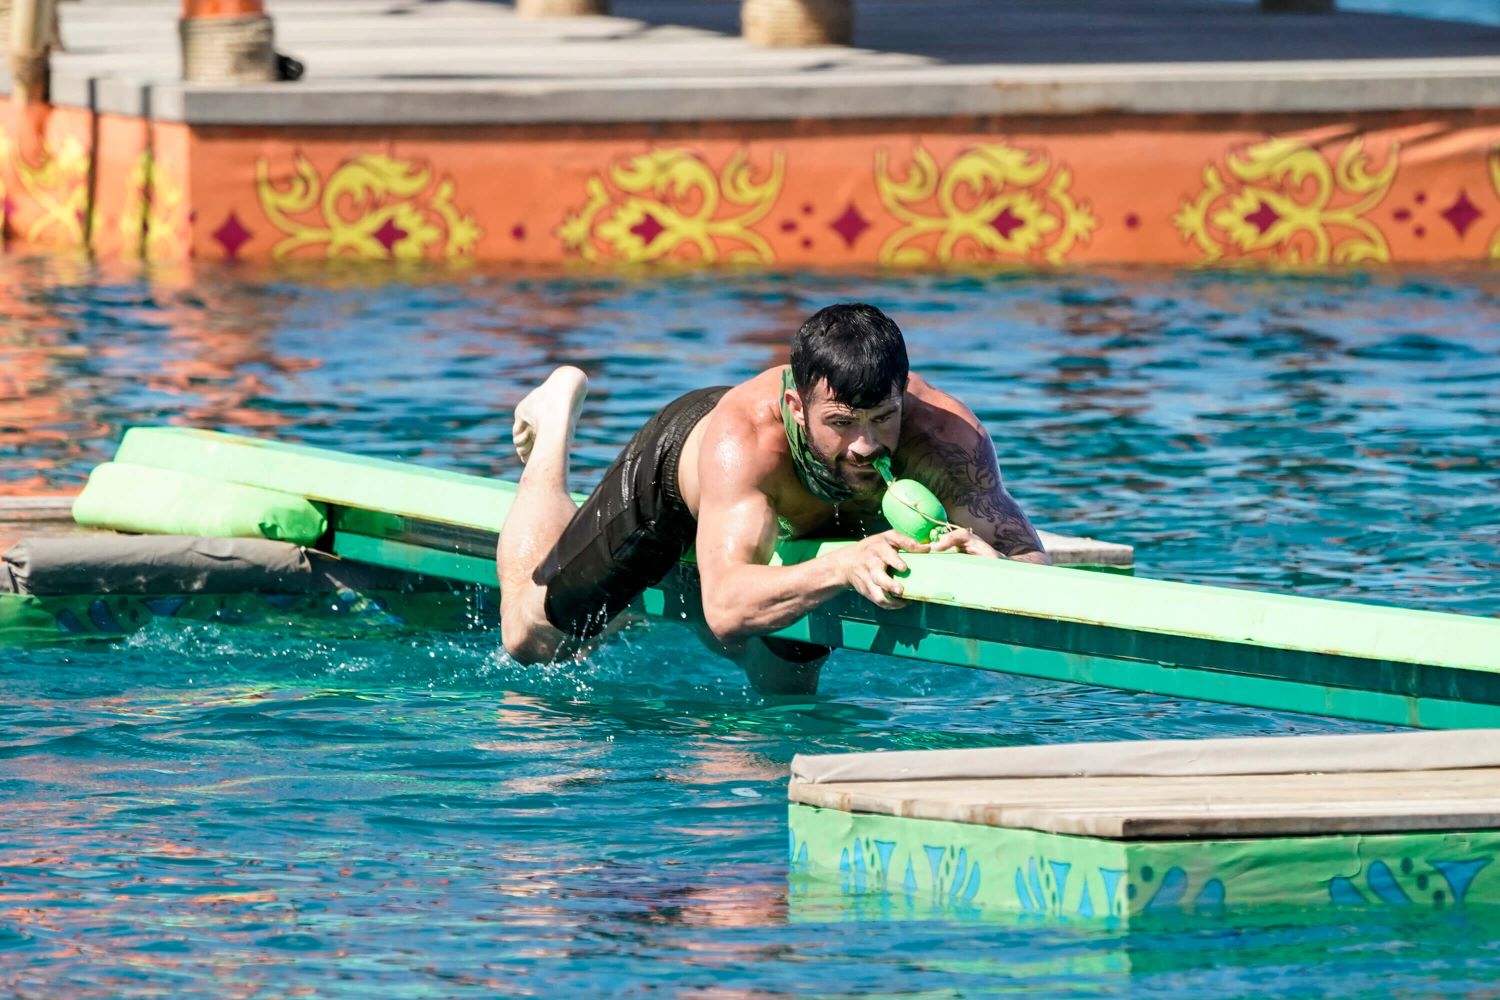 Danny Massa, one of the 'Survivor 44' castaways, competes in an Immunity Challenge in episode 4 by crawling on a thin beam suspended above the water wearing black shorts.